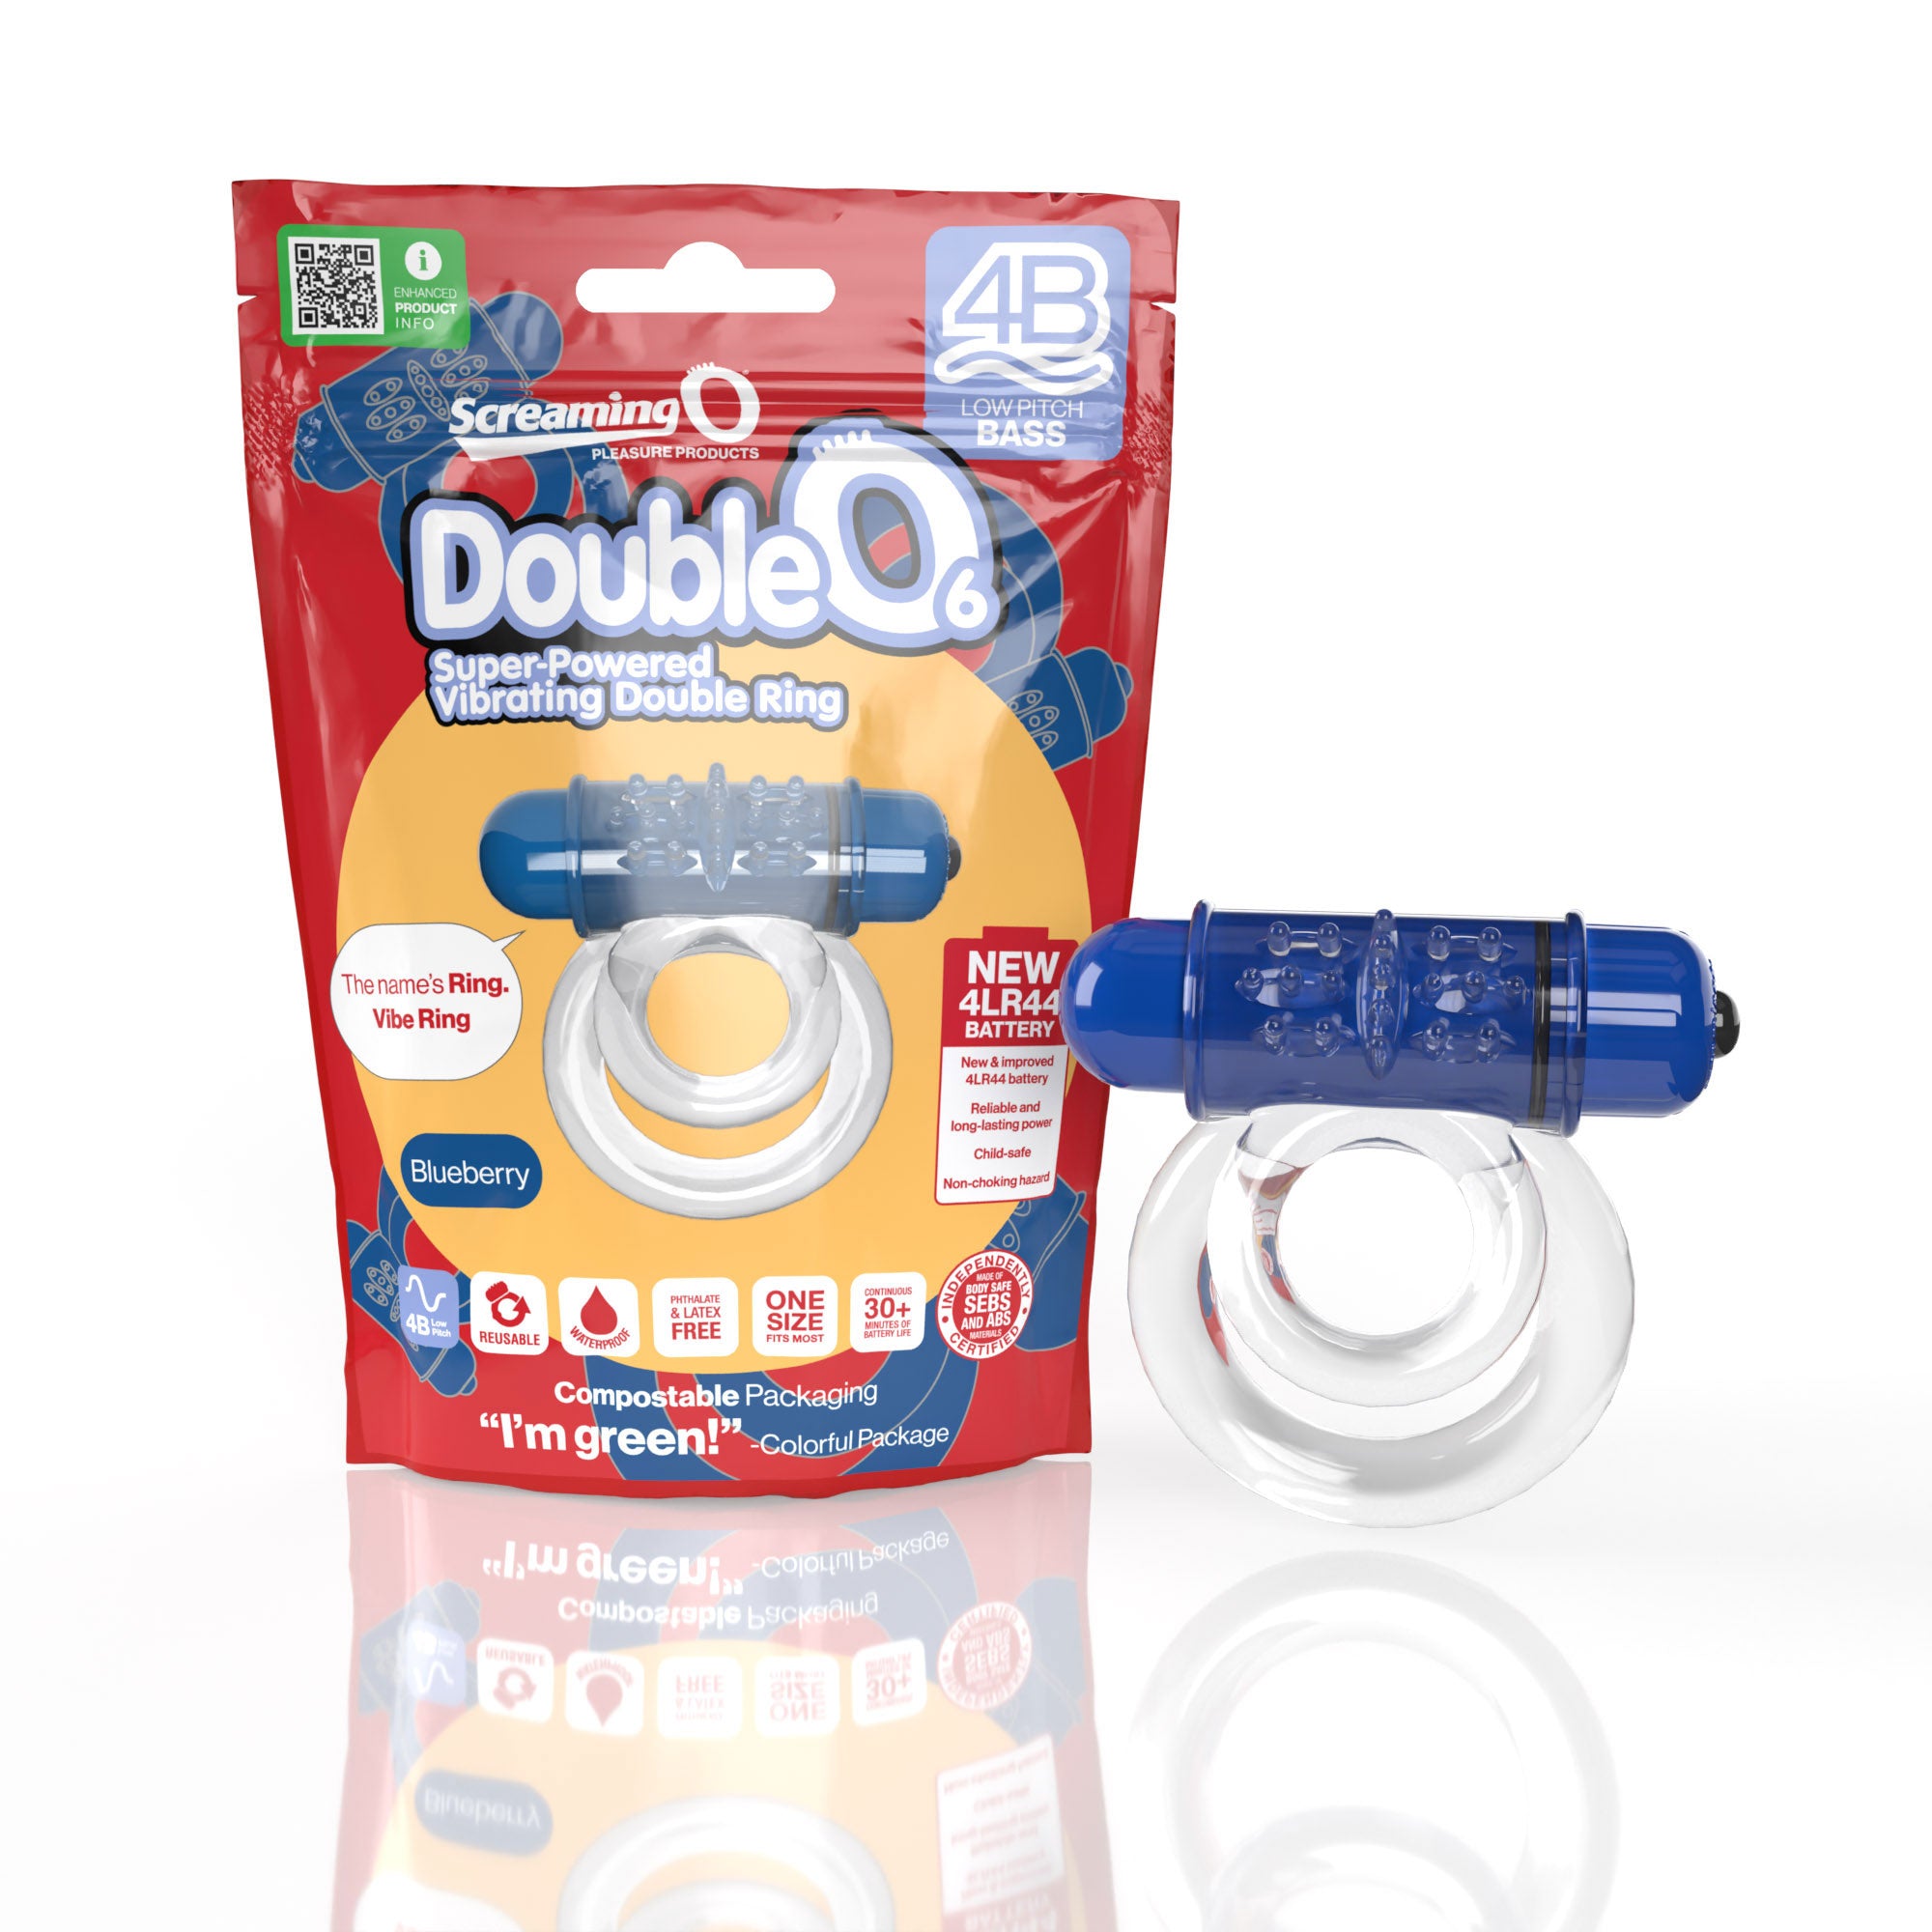 Screaming O 4b - Double O Super Powered Vibrating  Double Ring - Blueberry